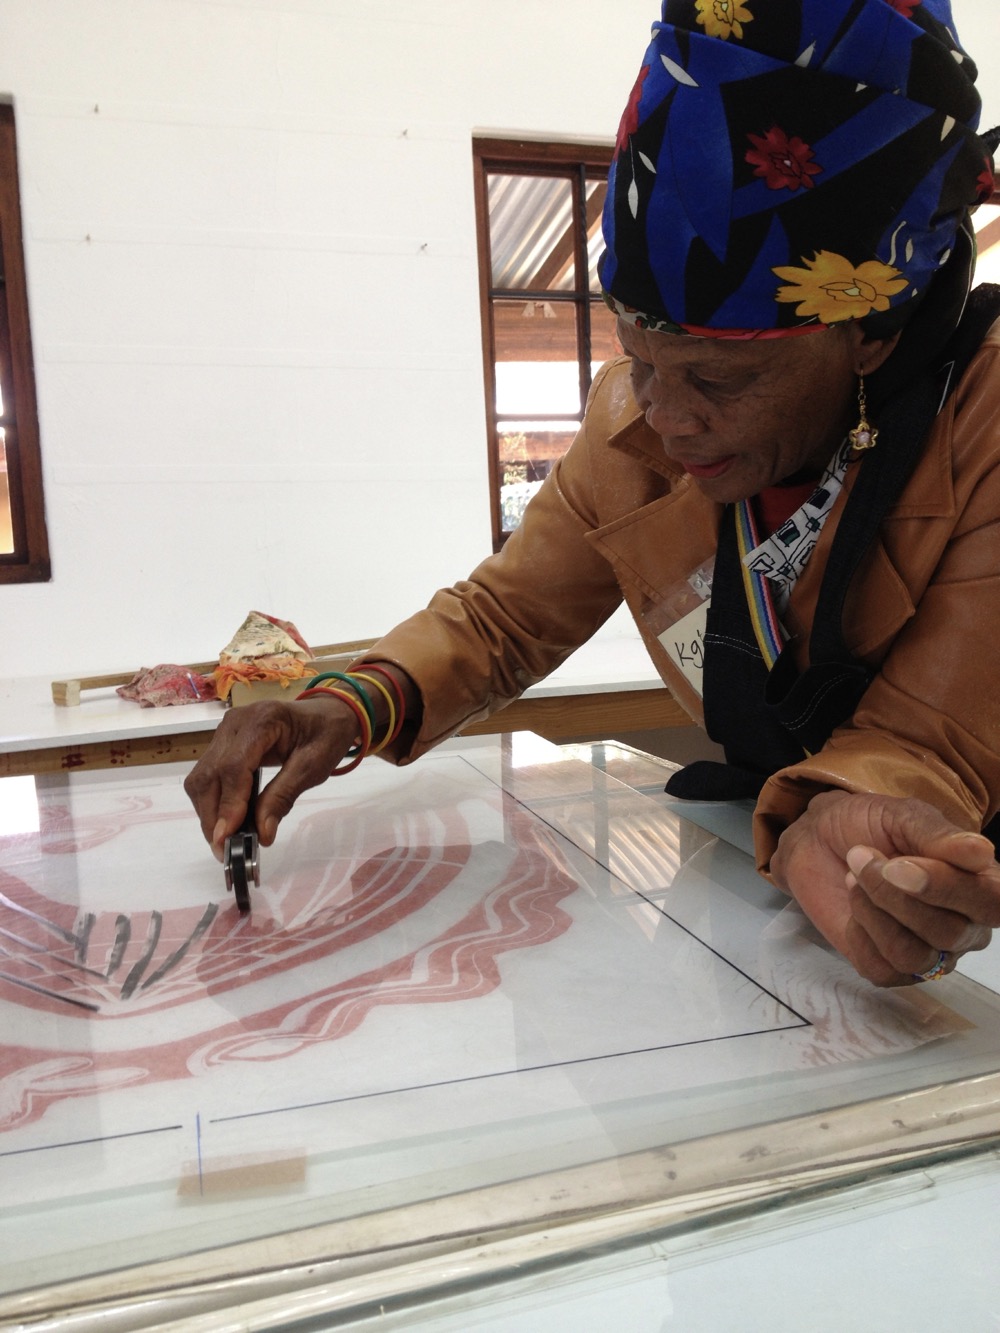 Monoprints by Kg'akg'am Tshabu that reveal her stong sense of form and colour and her vision of the world from the perspective of the first people of the Kalahari.